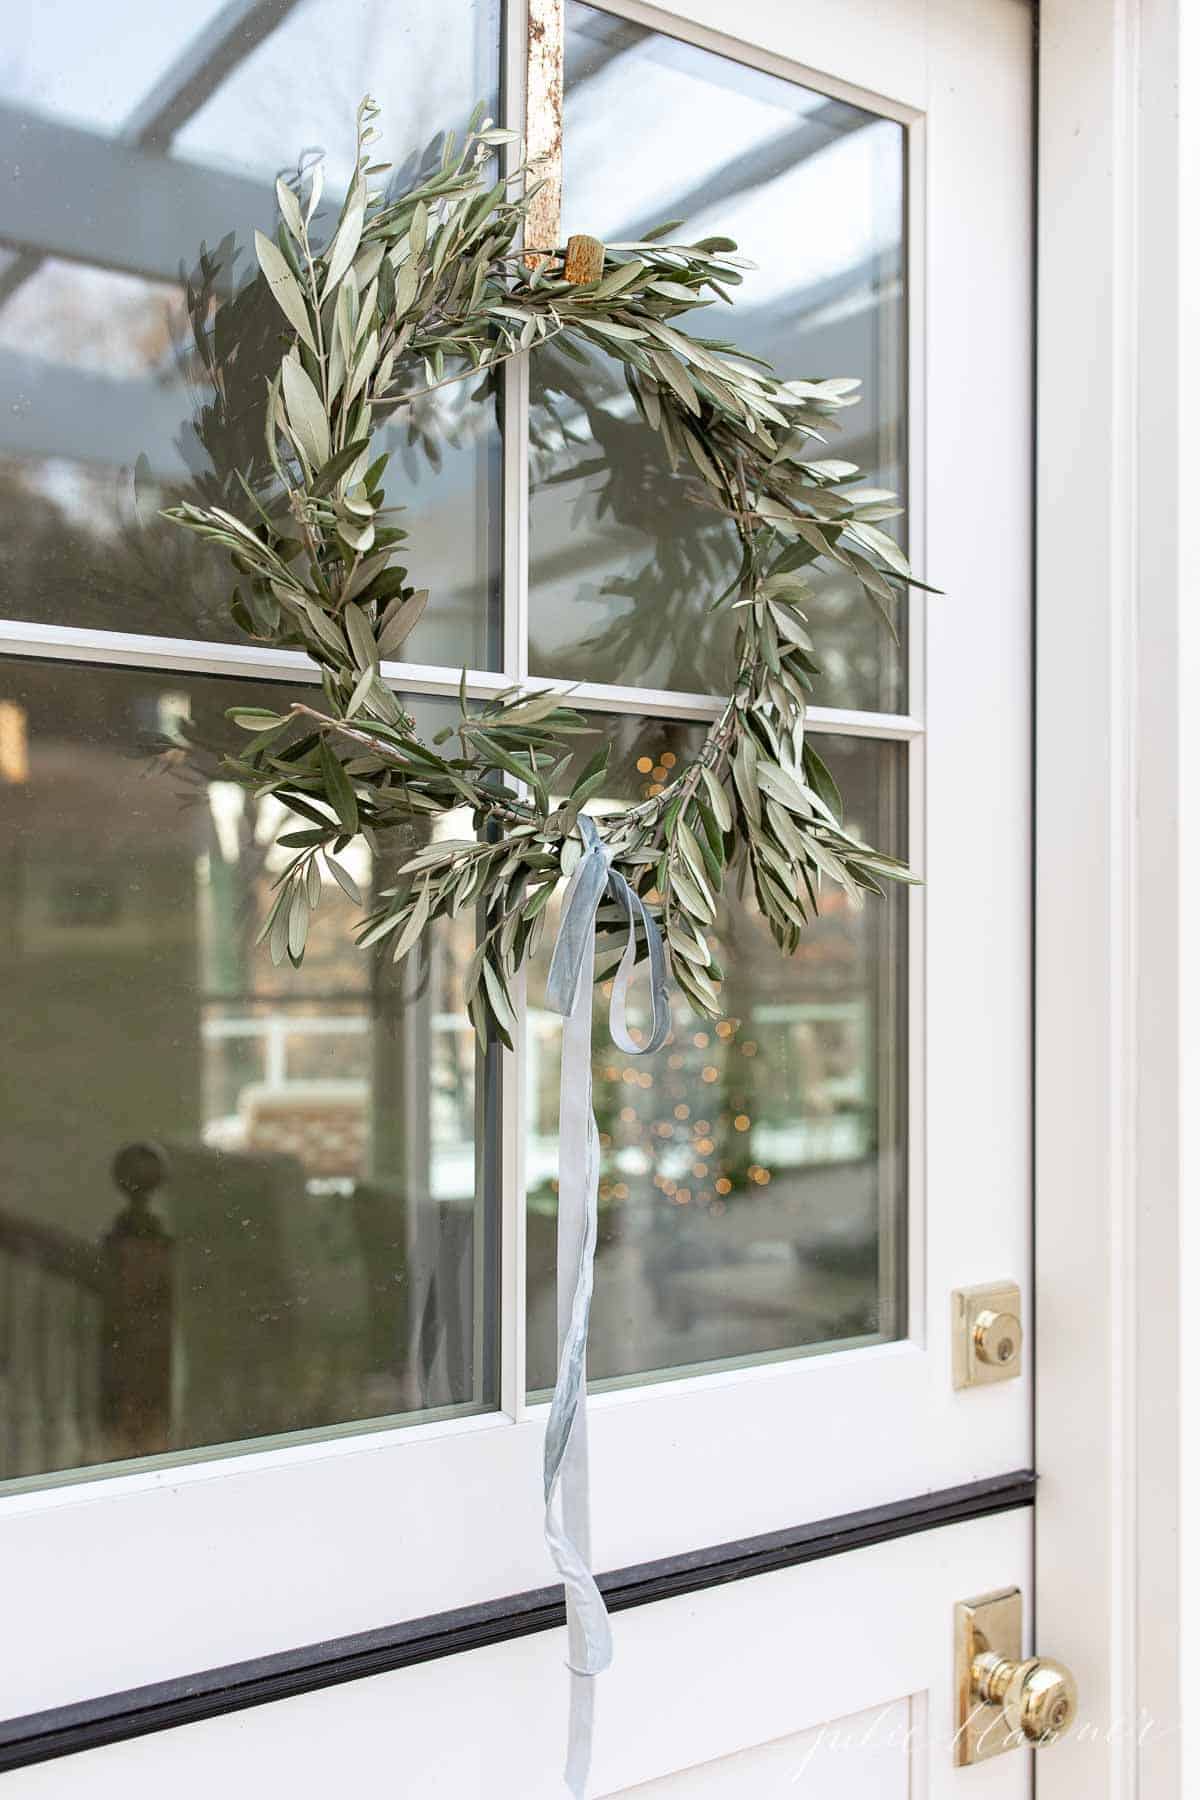 A dutch door with a DIY wreath hanging on the windows, looking into a living room decorated for Christmas.